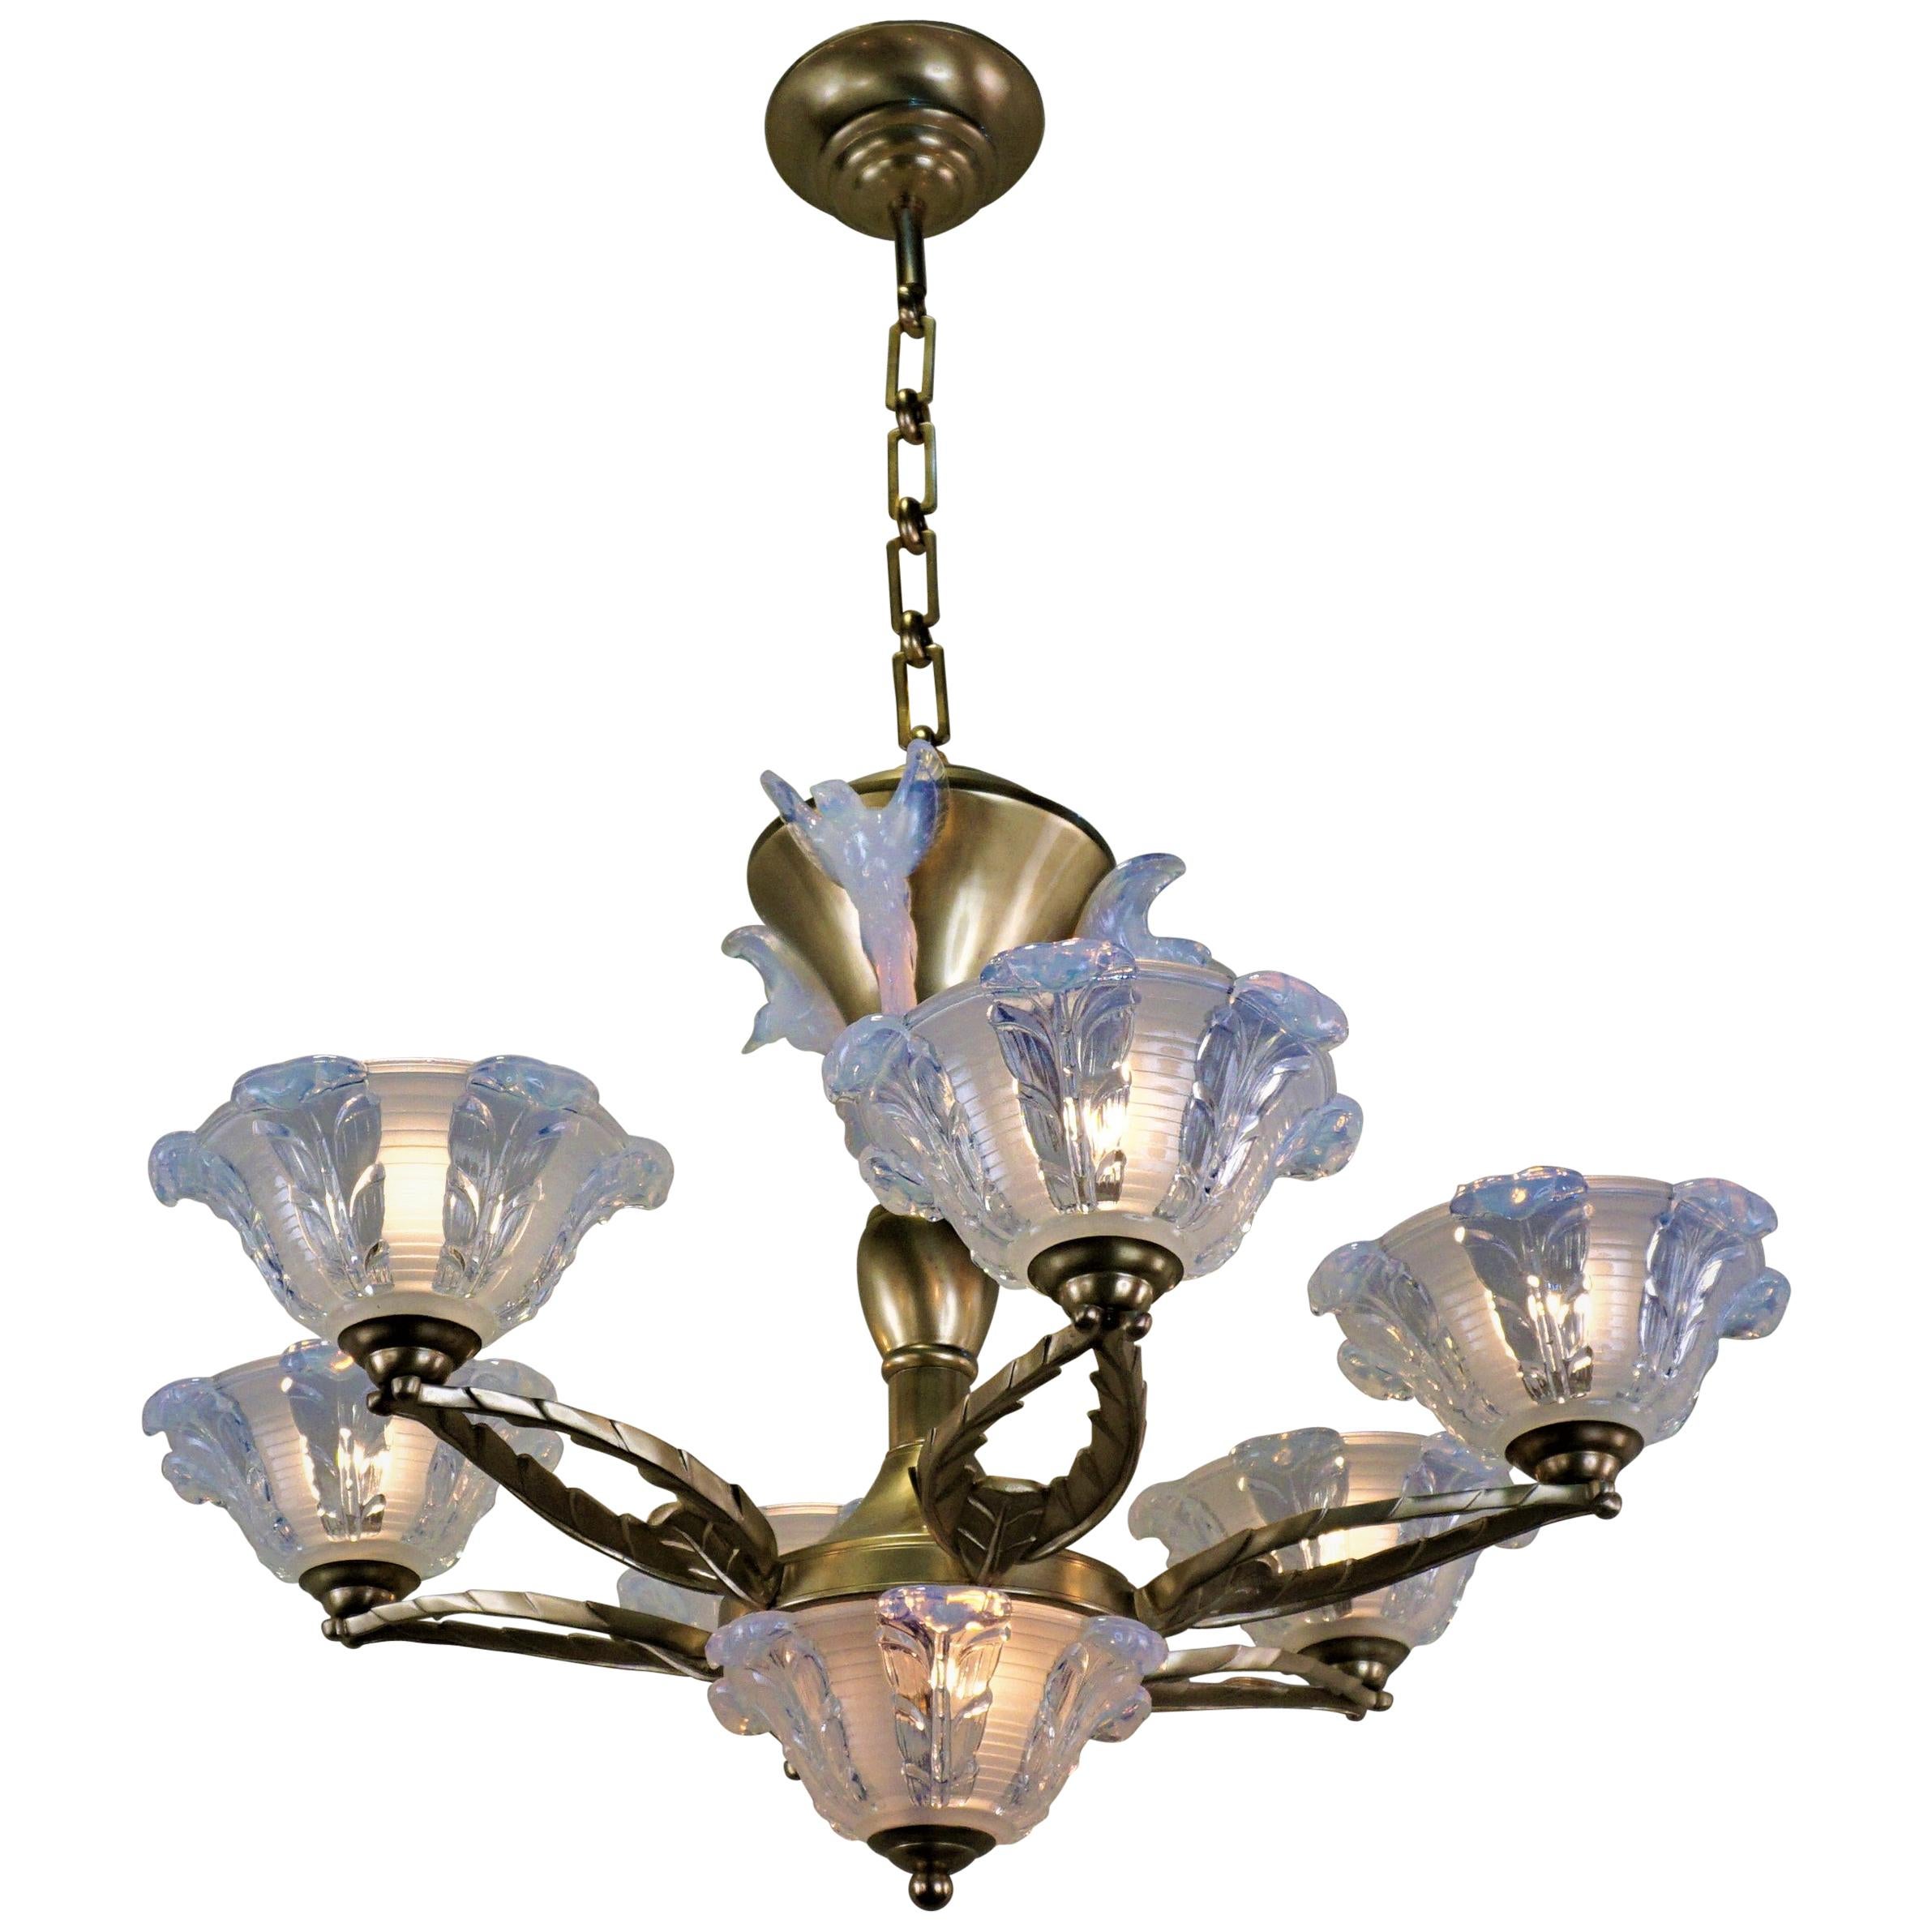 French Art Deco Chandelier with Opalescent Glass Shades by Ezan & Petitot